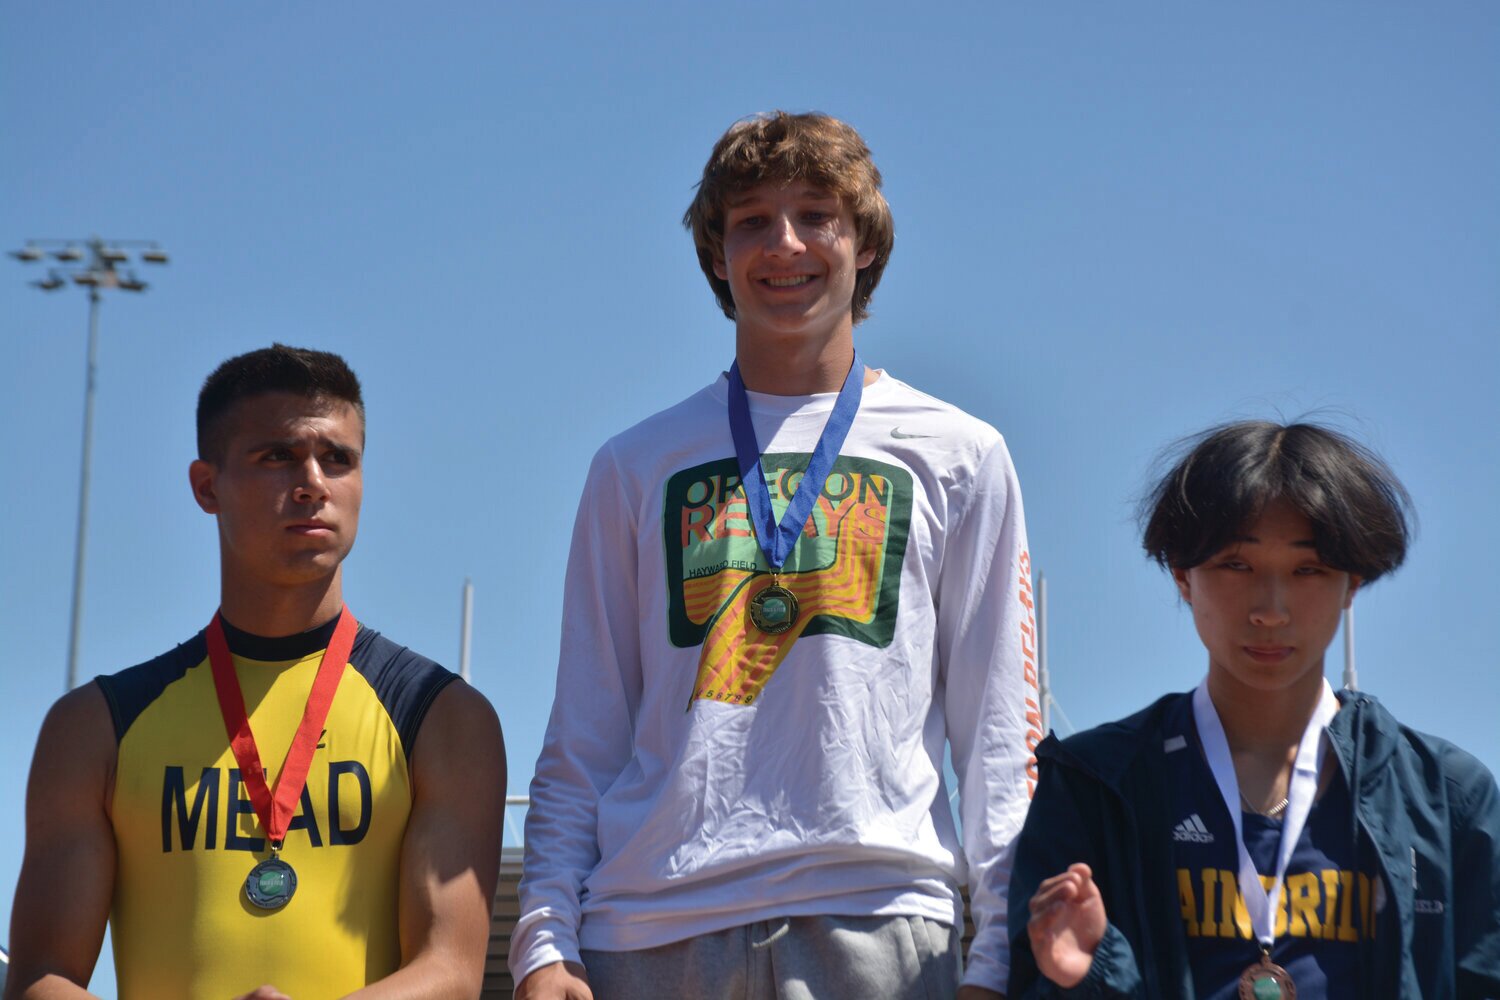 Jordan Lasher smiles atop the podium after a championship victory in the 3A pole vault competition on Friday, May 26.